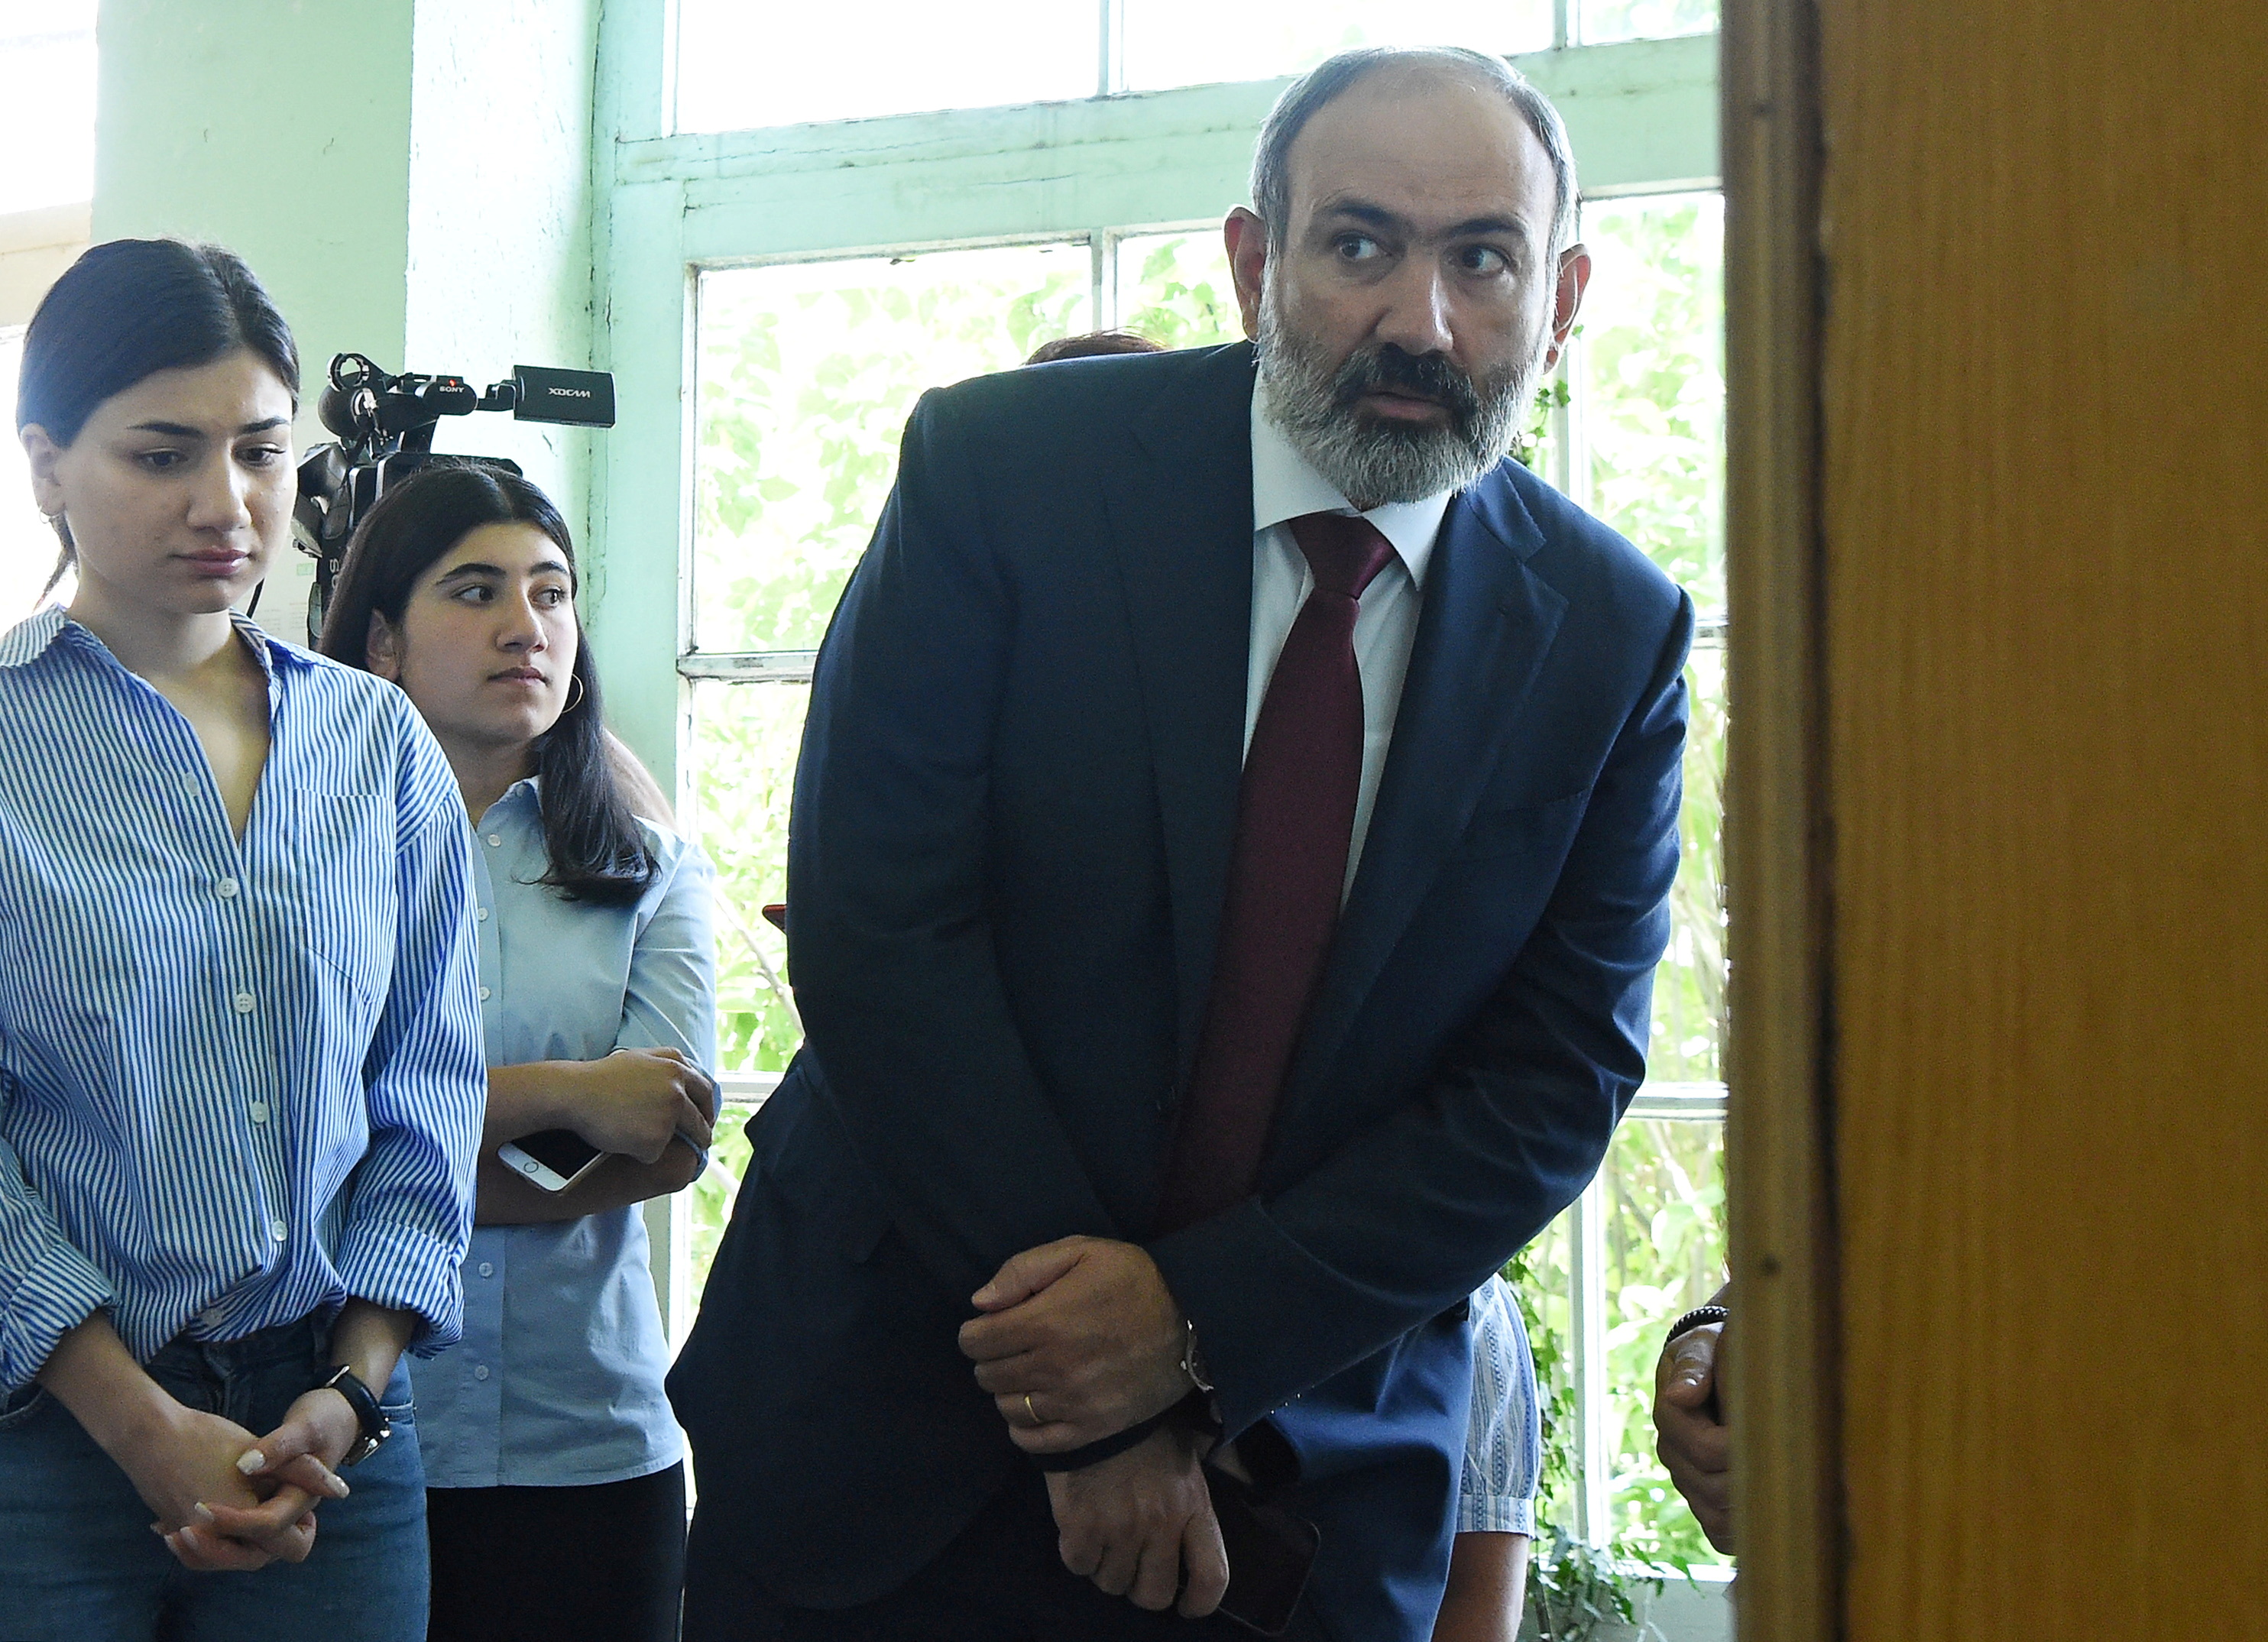 Armenia's acting Prime Minister and leader of Civil Contract party Nikol Pashinyan visits a polling station to cast his vote during the snap parliamentary election in Yerevan, Armenia June 20, 2021. Lusi Sargsyan/Photolure via REUTERS